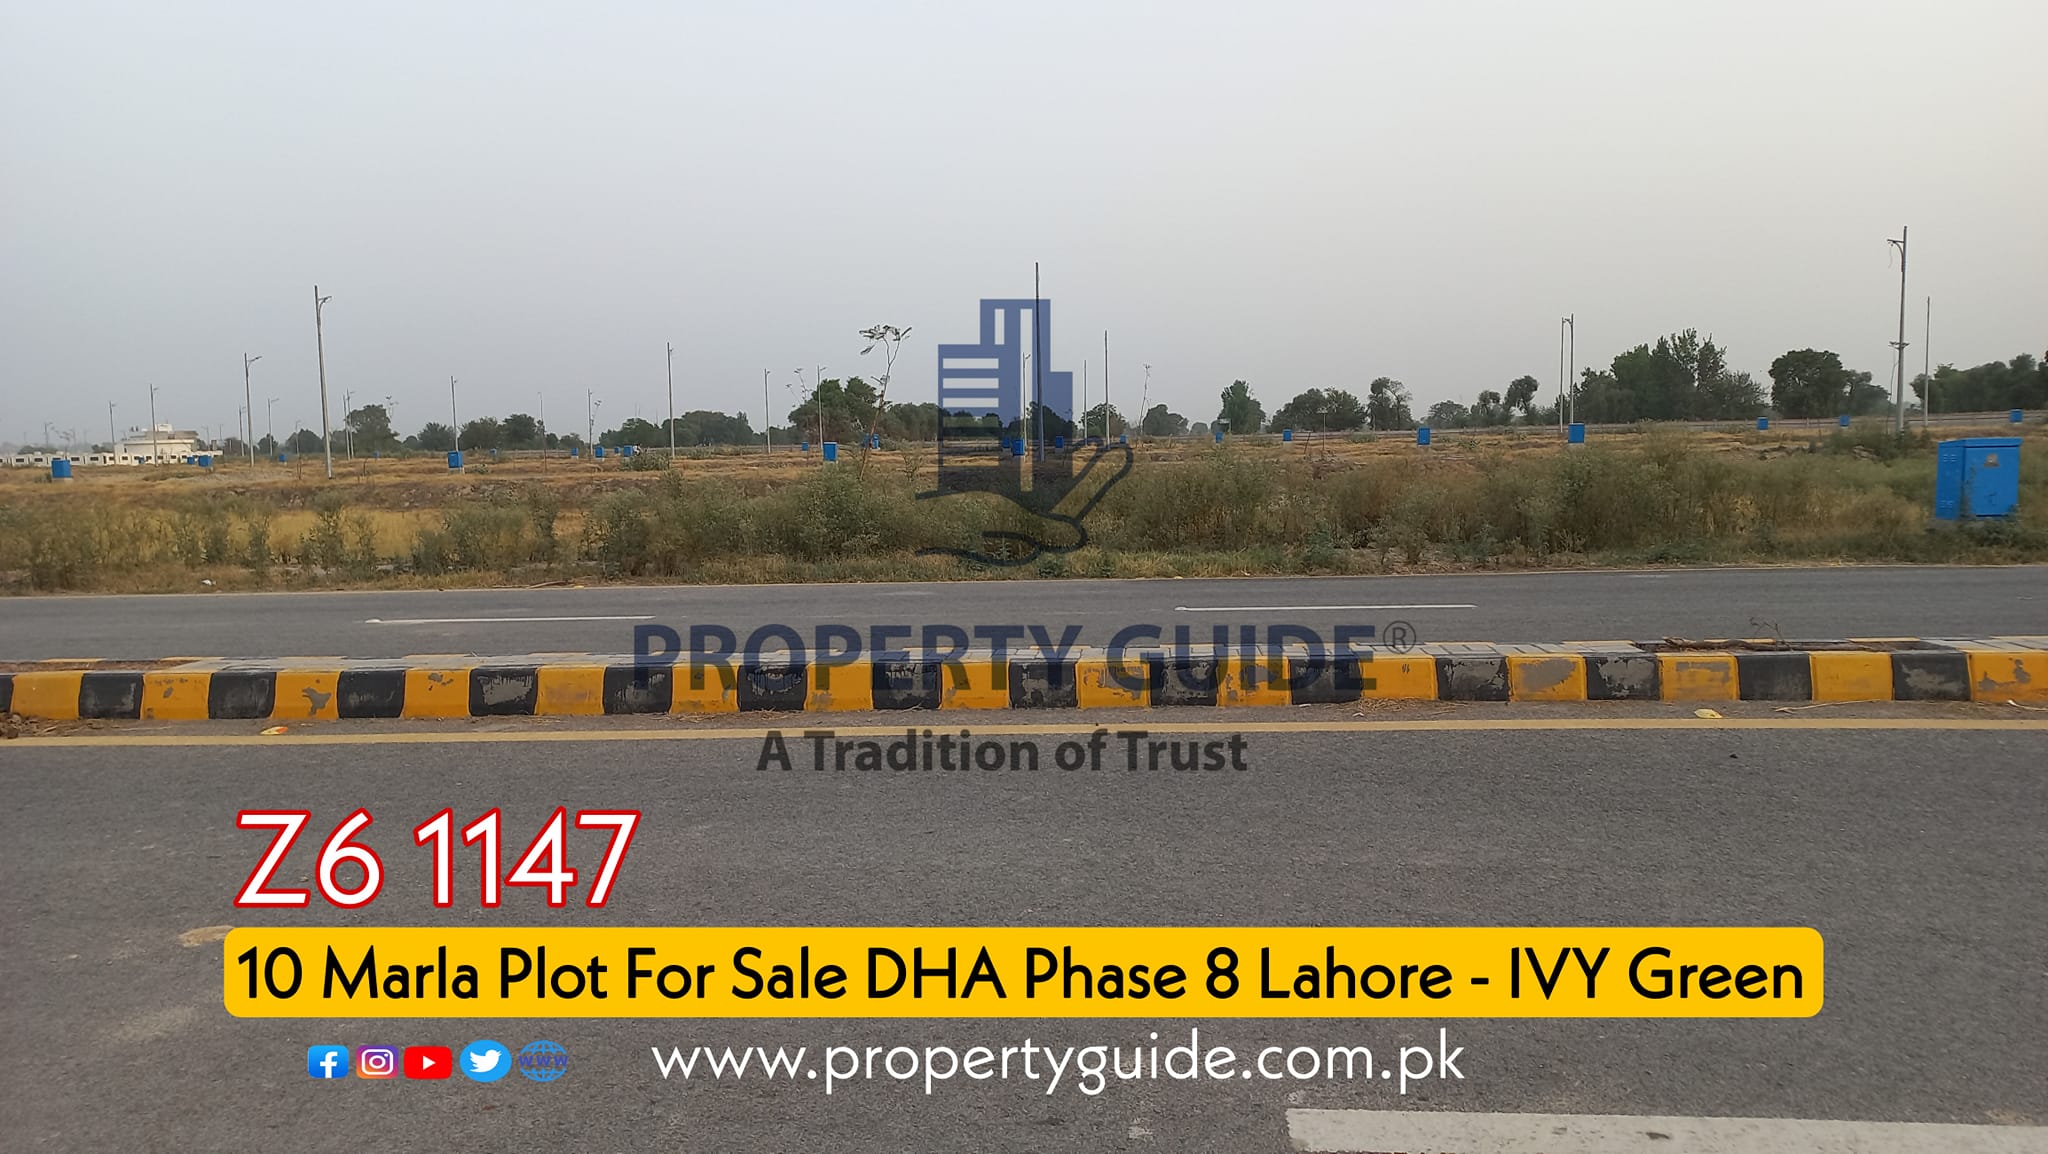 10 Marla Plot For Sale DHA Phase 8 Lahore IVY Green Z6 1147